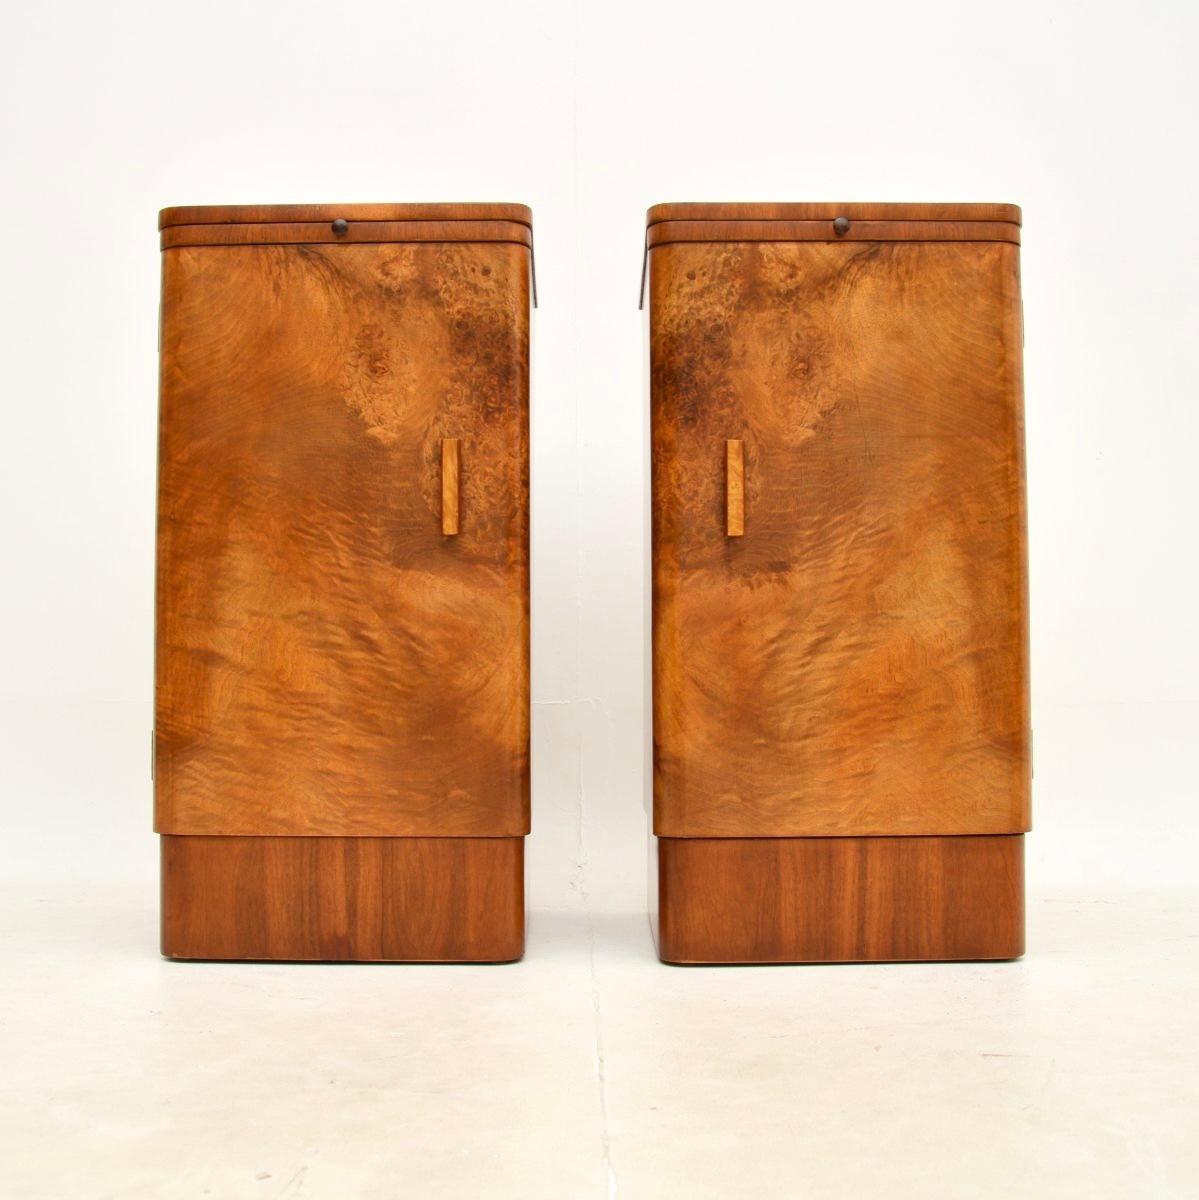 A stunning pair of Art Deco burr walnut bedside cabinets. They were made in England, they date from the 1930’s.

They are of excellent quality and are a very useful size. The burr walnut has a gorgeous colour tone and beautiful grain patterns